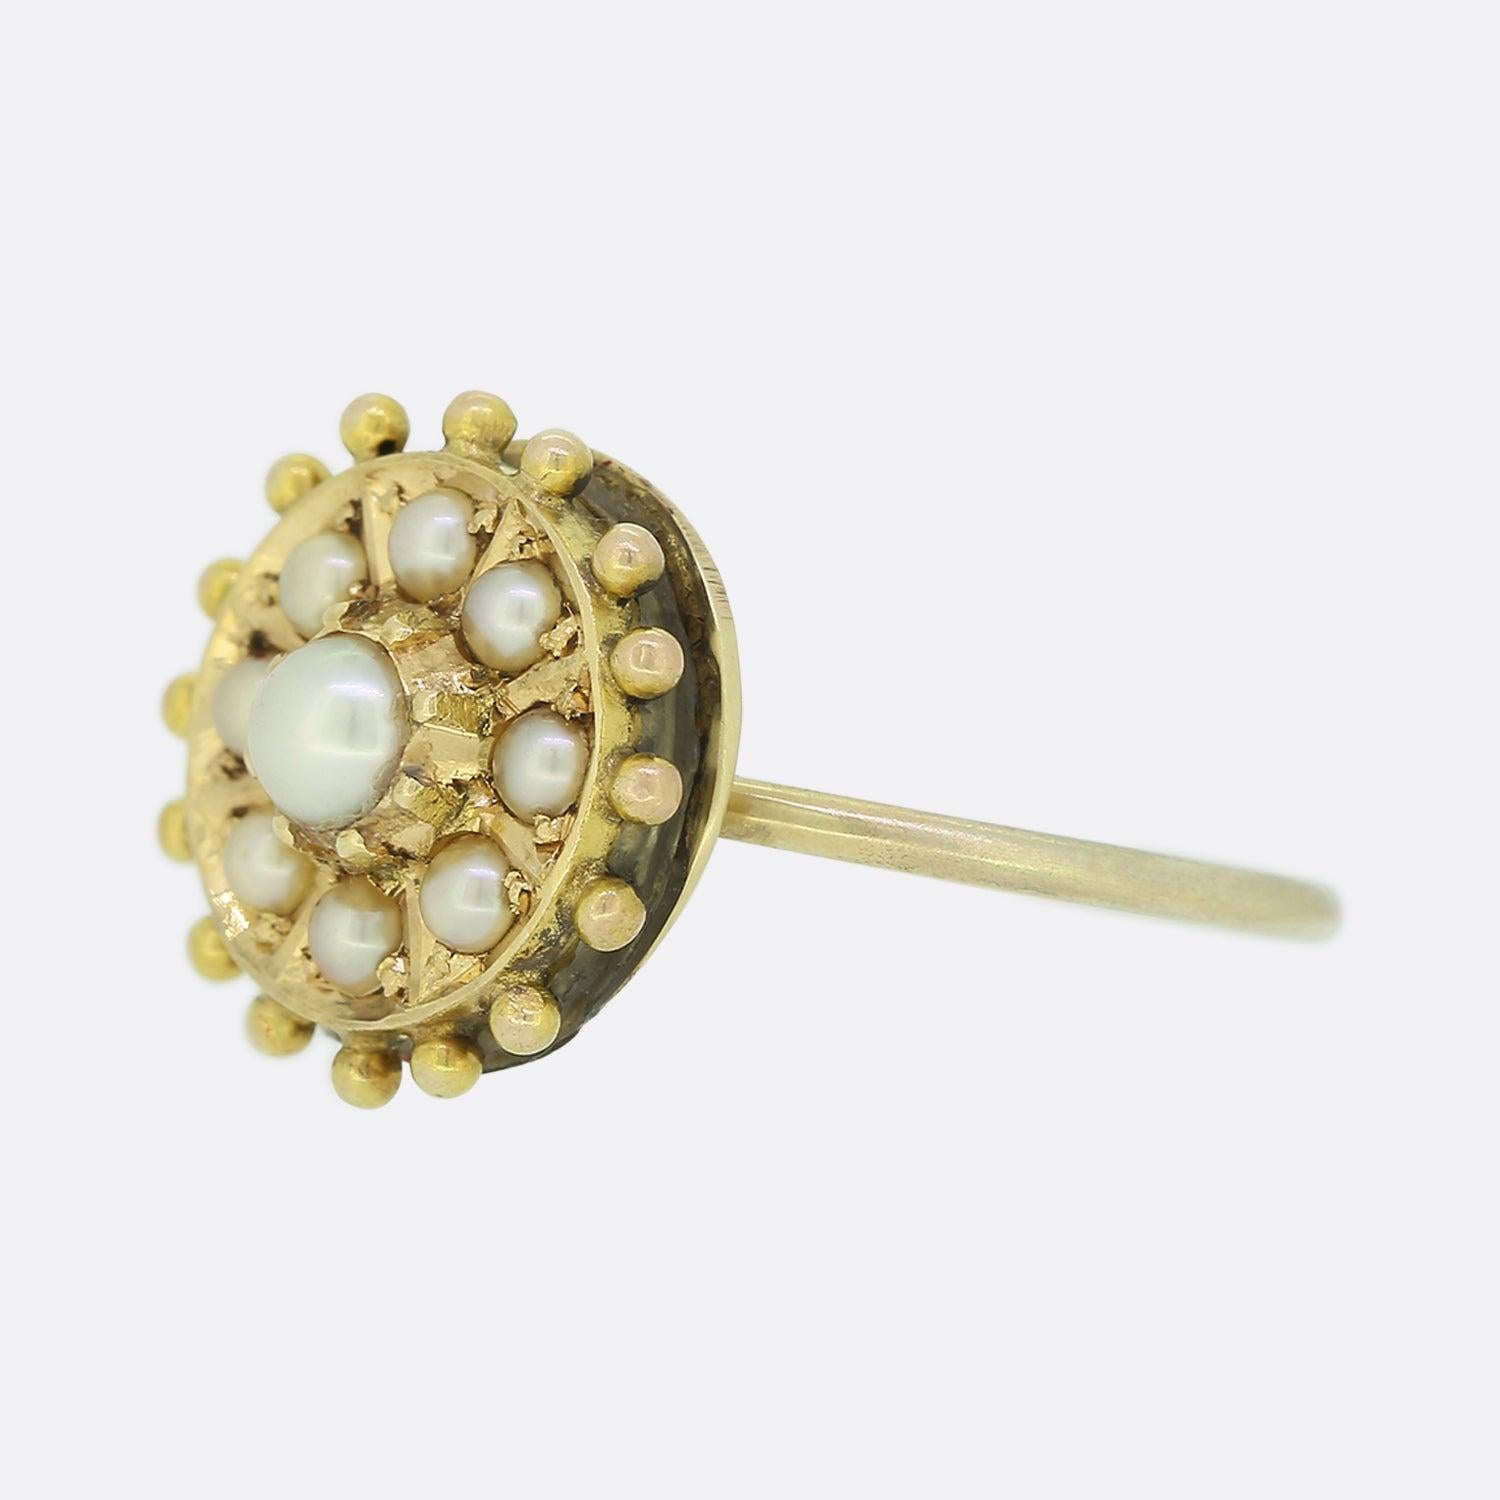 This is a lovely antique Victorian pearl ring. The ring features a central pearl which is surrounded by a further eight pearls in an Etruscan setting crafted in gold. This ring started life as an antique Victorian brooch but has been transformed